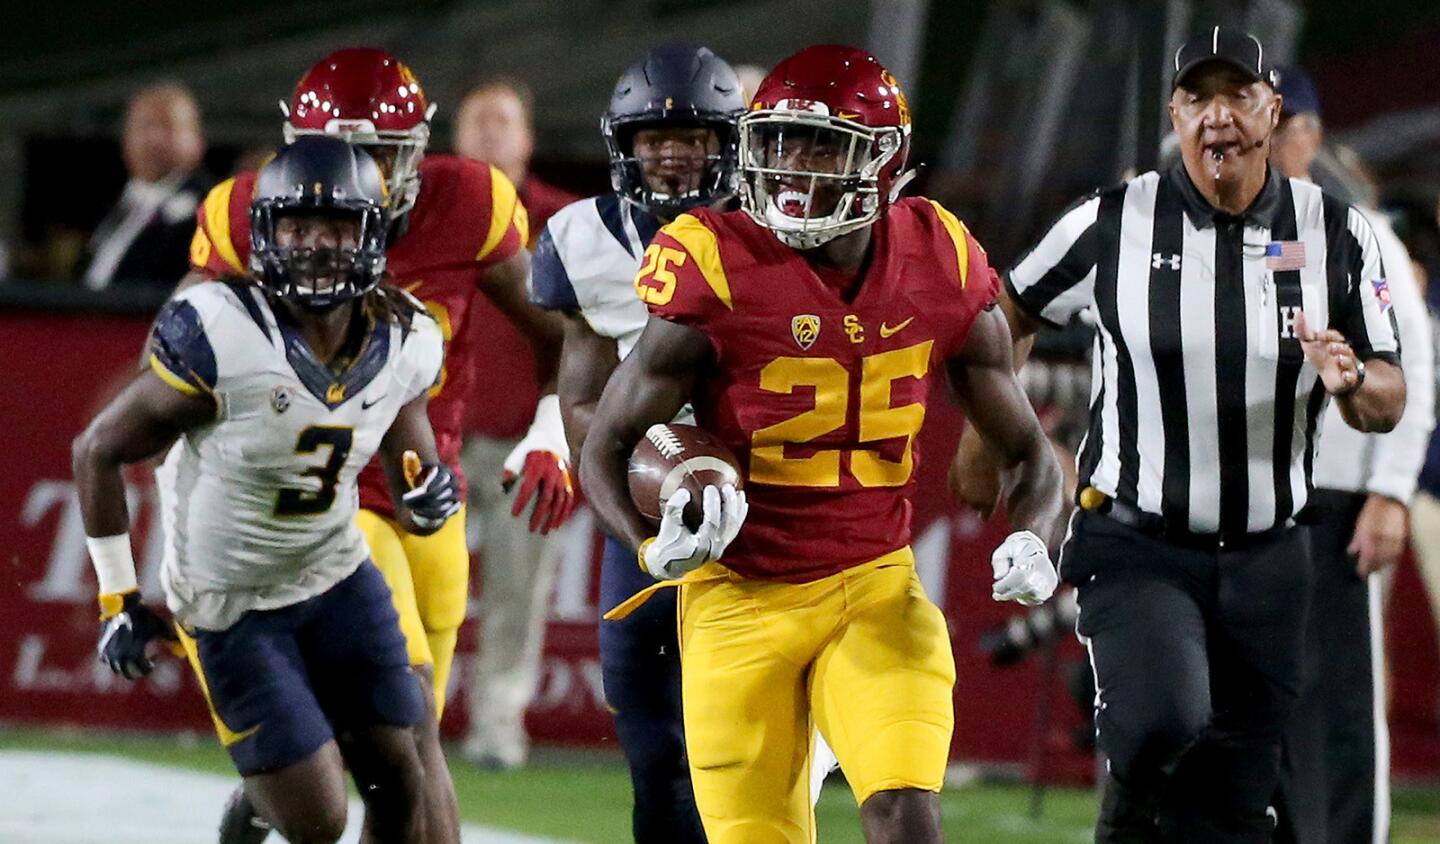 USC running back Ronald Jones II breaks away for a big gain against California during the first quarter of a game on Oct. 27.